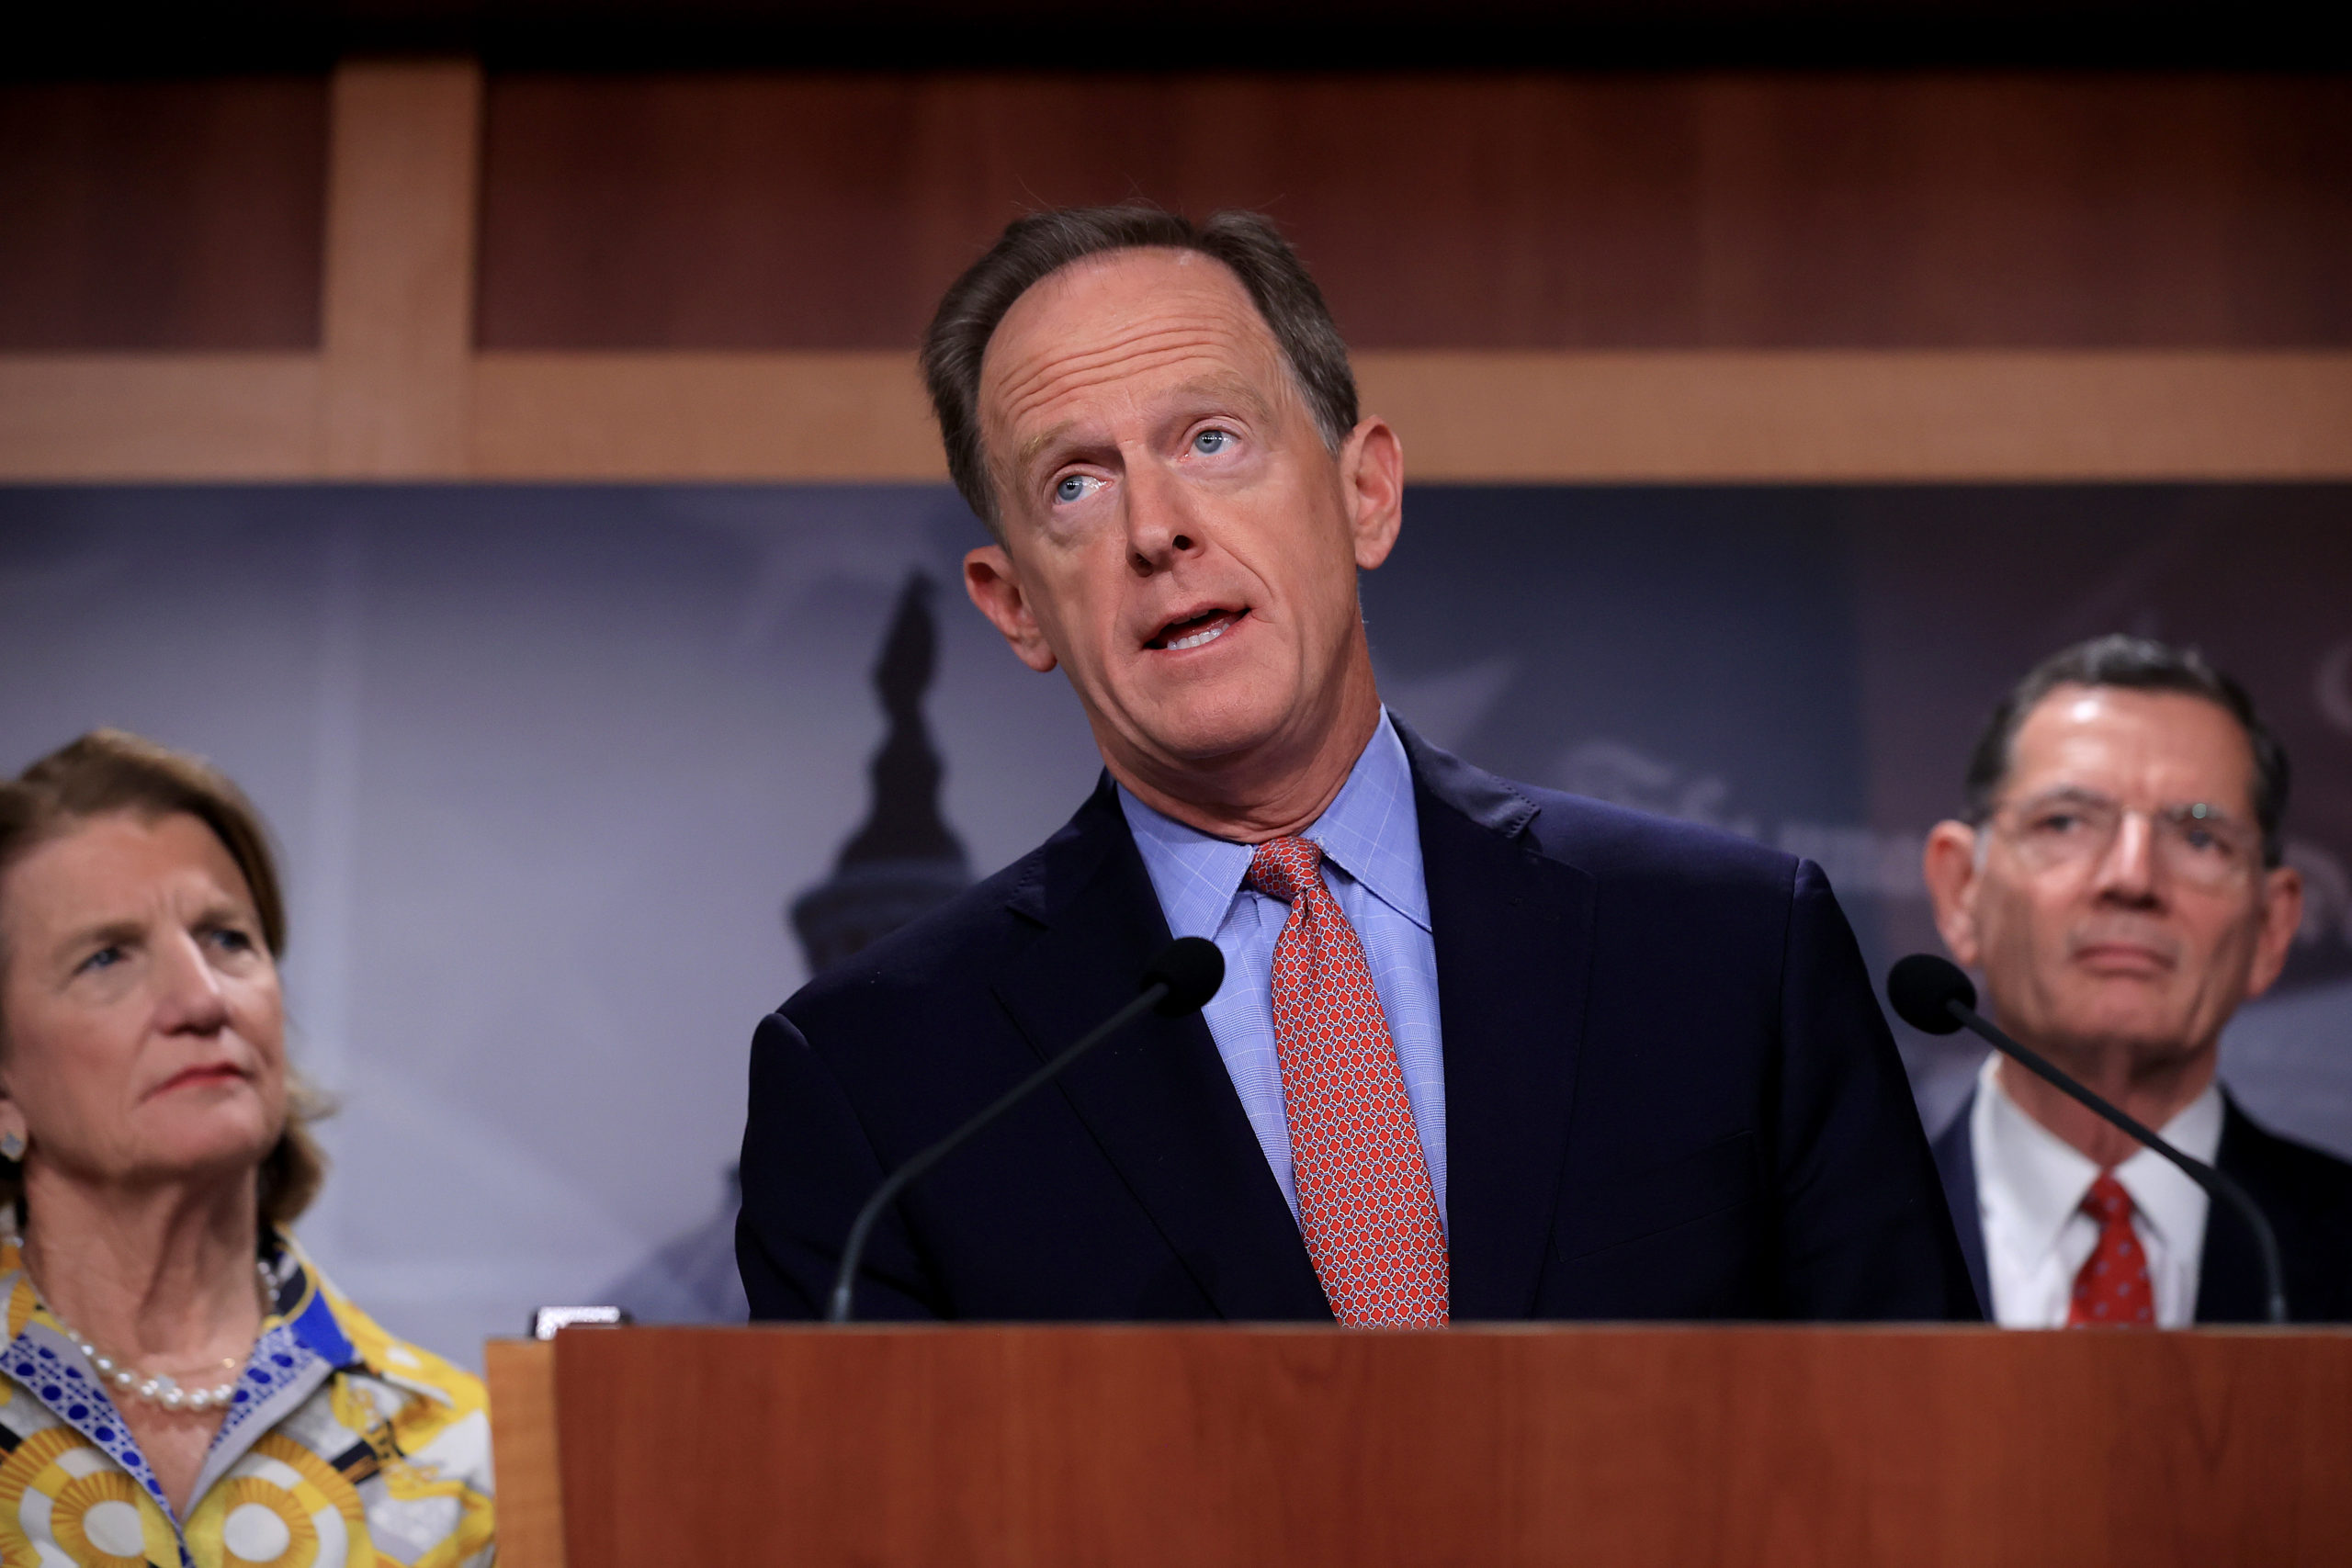 Sen. Pat Toomey speaks during a news conference on May 27. (Chip Somodevilla/Getty Images)